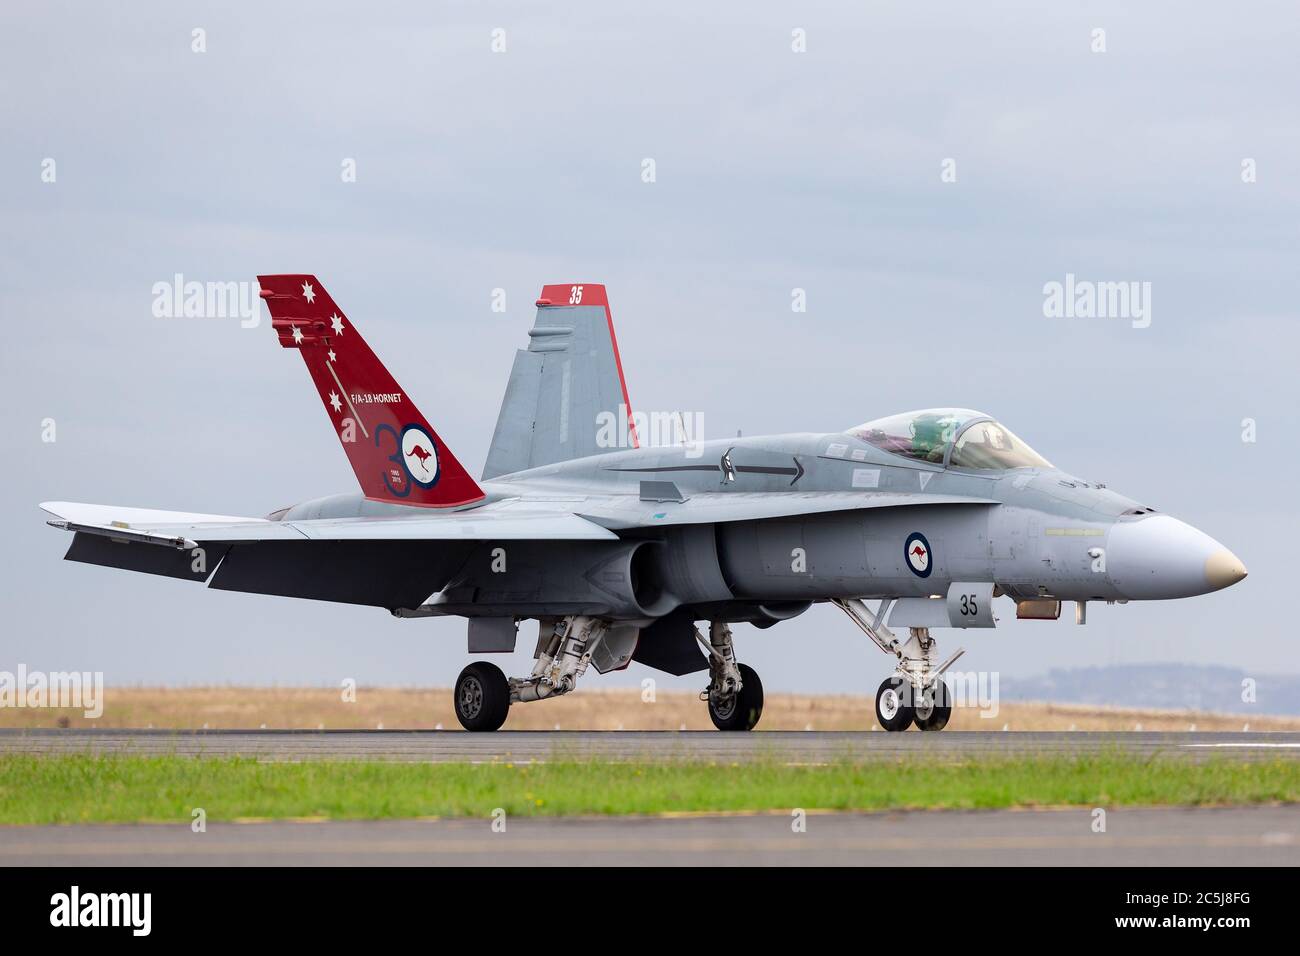 Royal Australian Air Force (RAAF) McDonnell Douglas F/A-18A Hornet multirole fighter aircraft A21-35 with a specially marked tail to commemorate the 3 Stock Photo